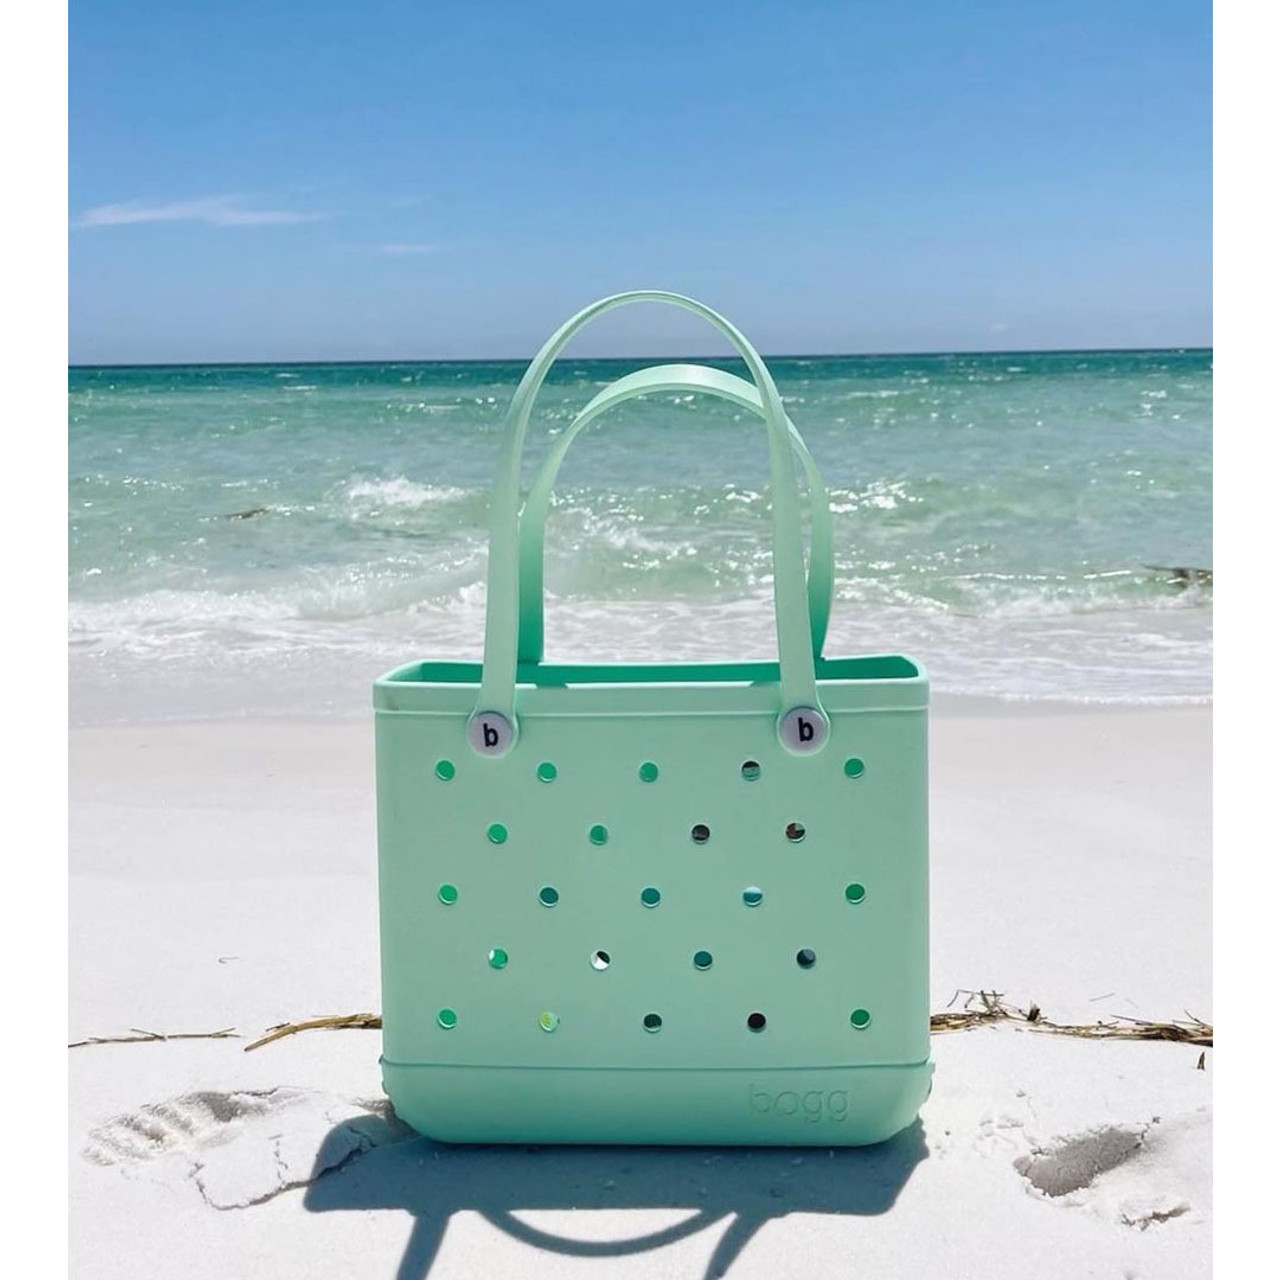 On The Hunt For A GREEN Baby Bogg Bag - Regalo